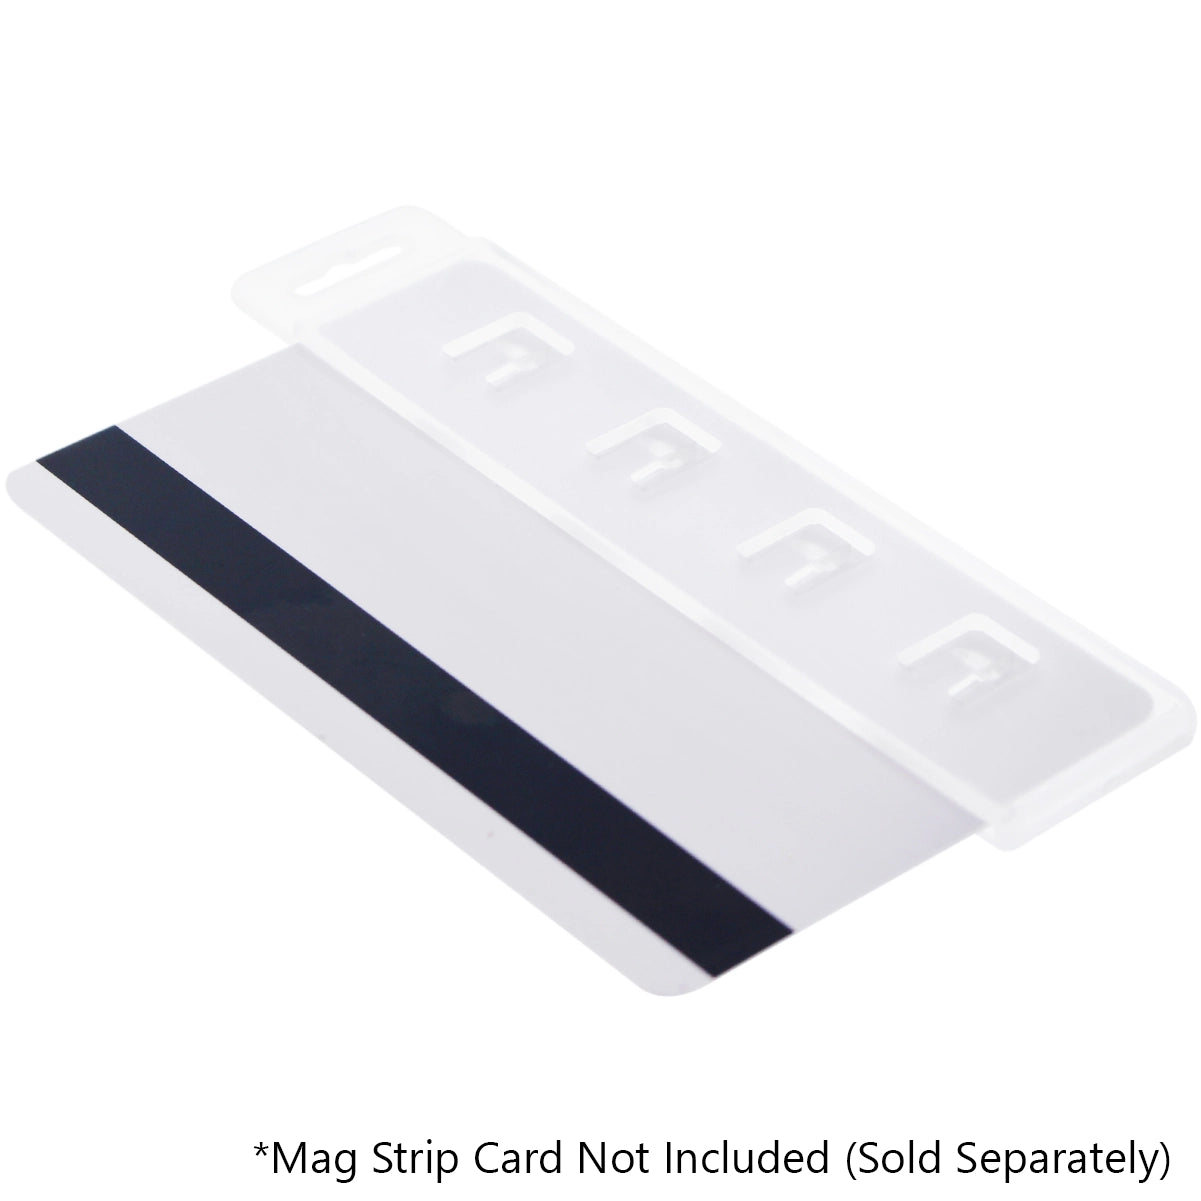 A Vertical Half Card Holder for Magnetic Stripe Swipe Cards - Heavy Duty Gripper (SPID-1380) with four hooks. A card with a black magnetic strip is placed underneath. Text at the bottom reads "Mag Strip Card Not Included (Sold Separately)." Ideal for professional purchasers using magnetic stripe swipe cards.